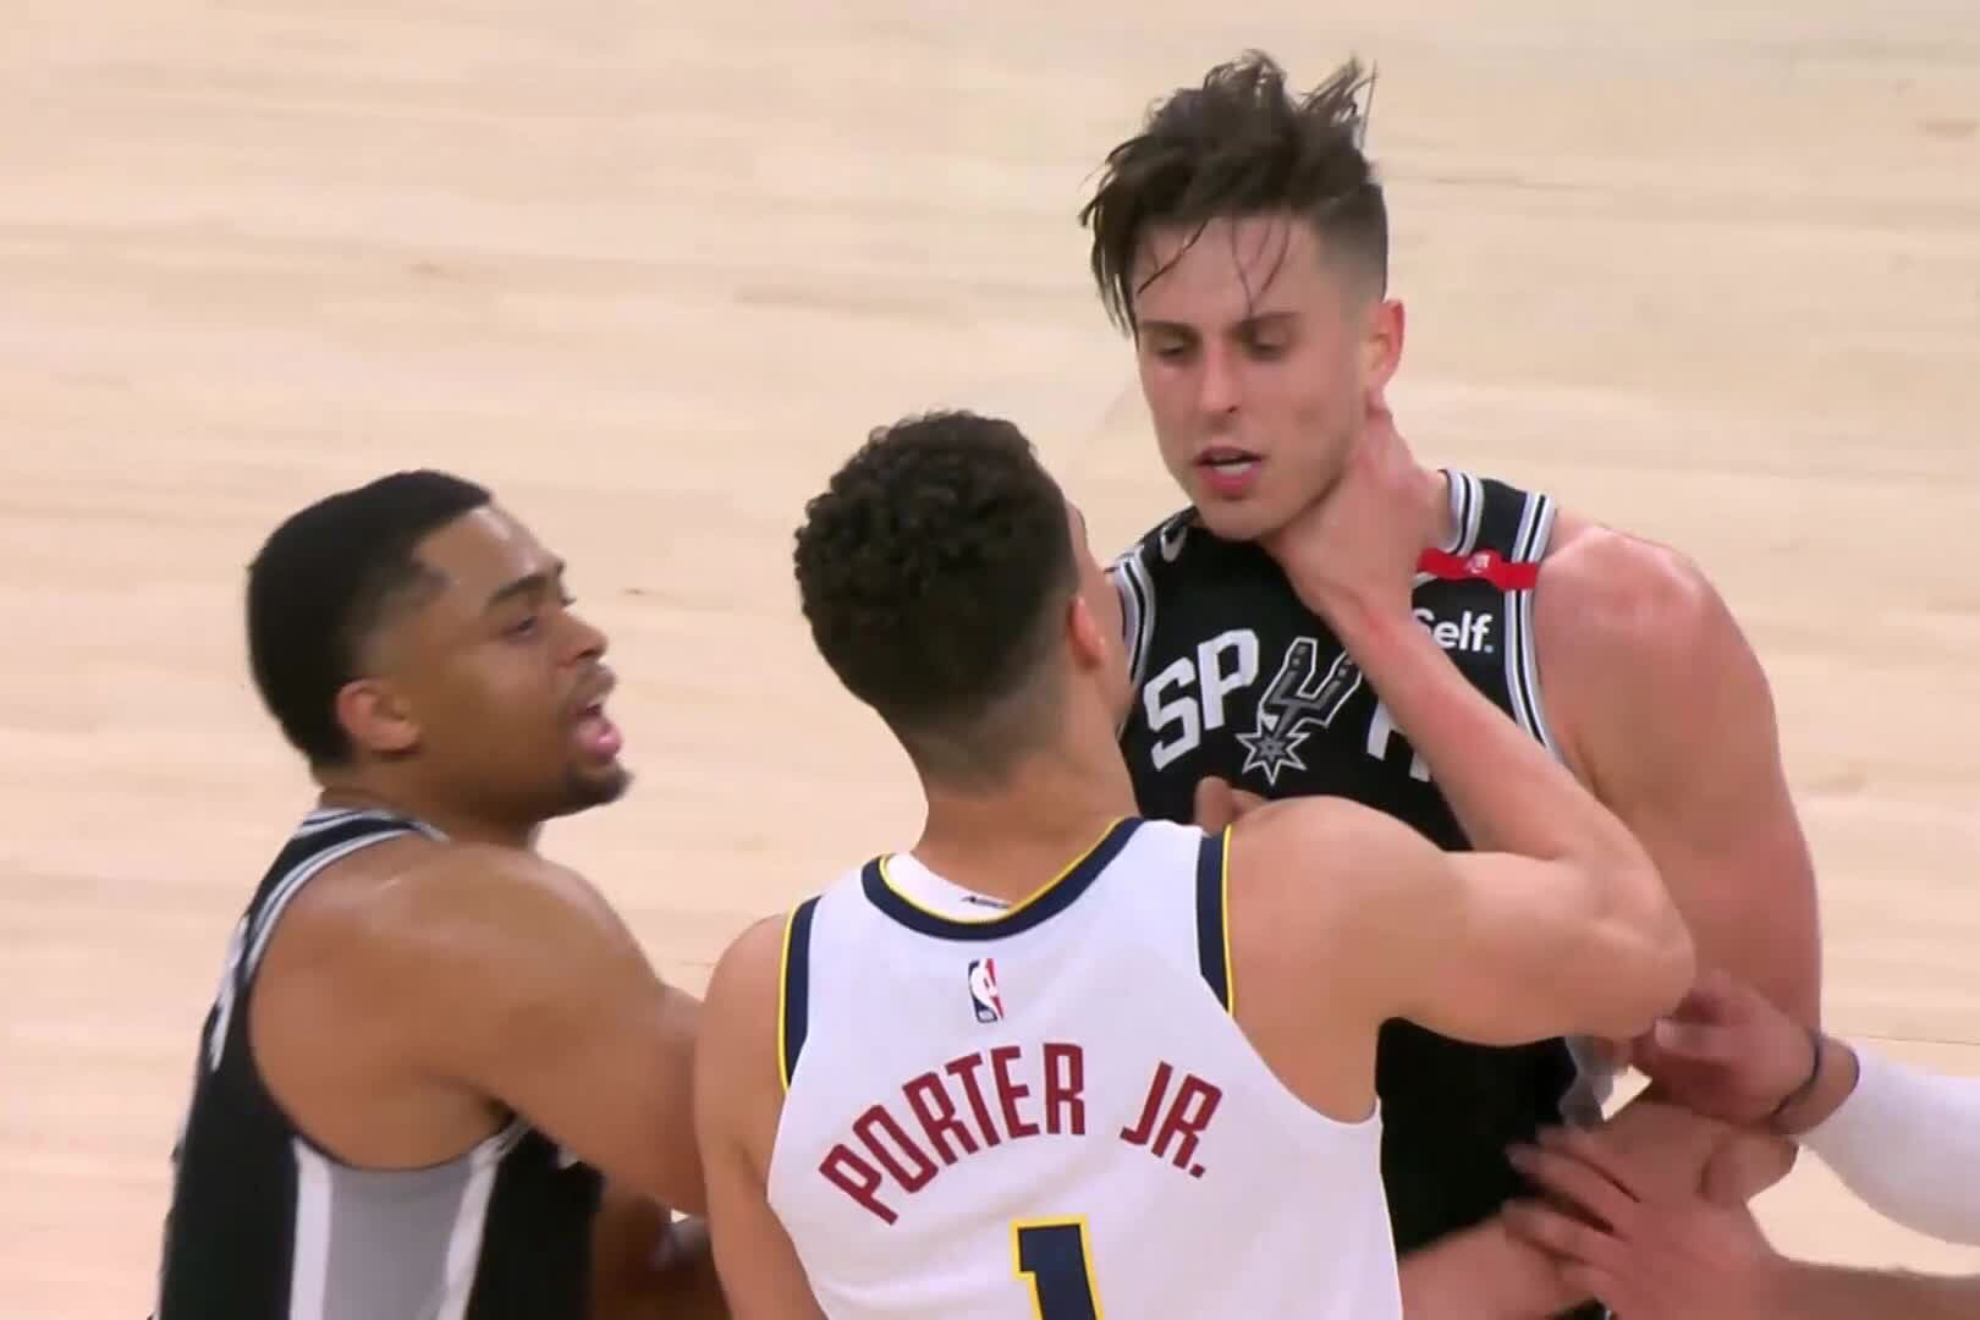 Tension in the NBA: Michael Porter Jr. grabbed Zach Collins by the neck in Spurs vs Nuggets